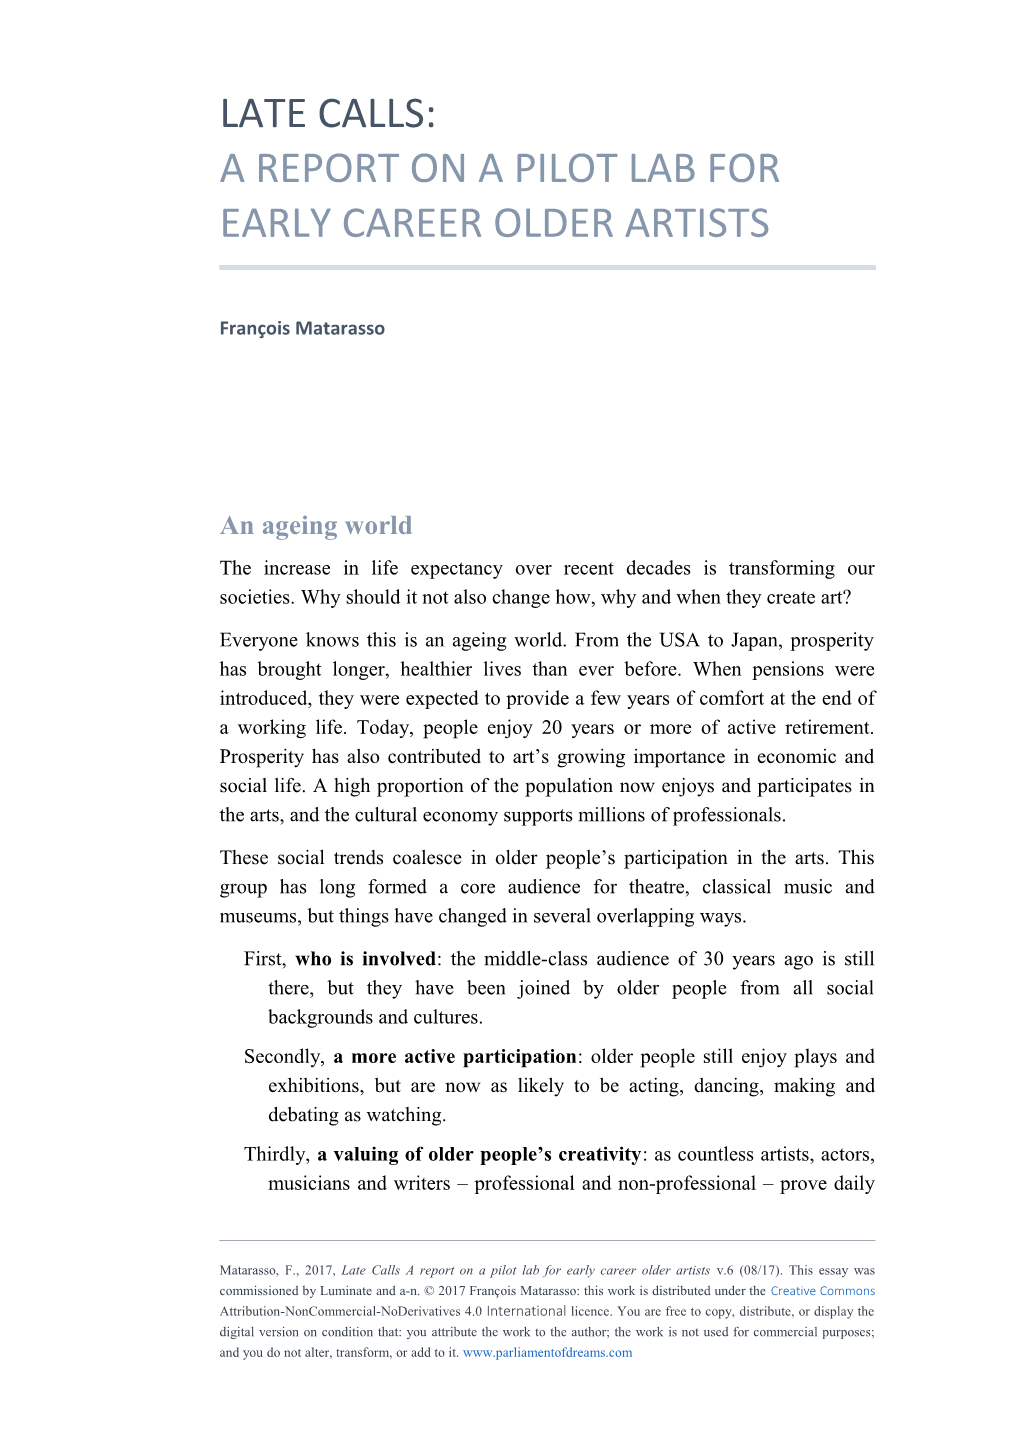 A Report on a Pilot Lab for Early Career Older Artists